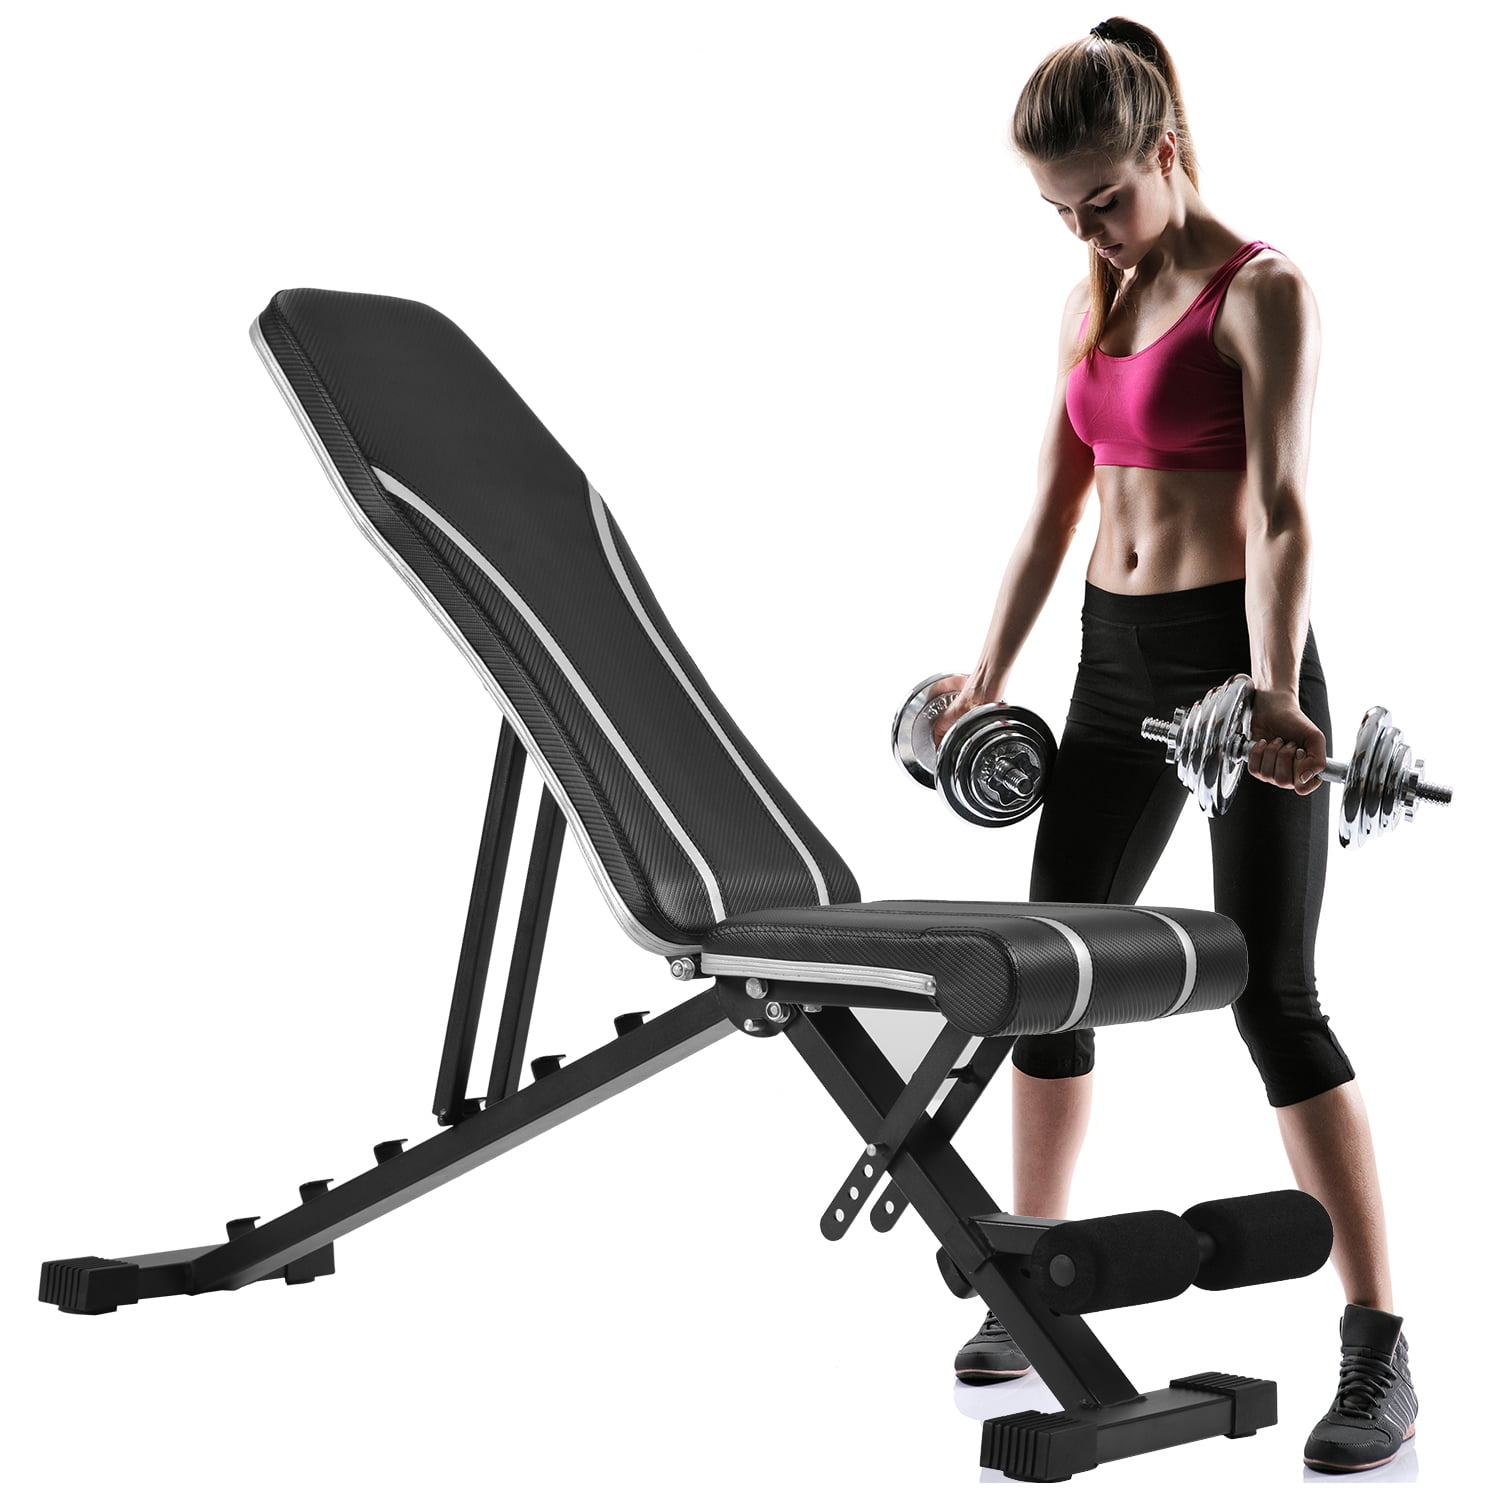 Details about   Adjustable Weight Bench Incline Decline Foldable Full Body Workout Gym NEW 